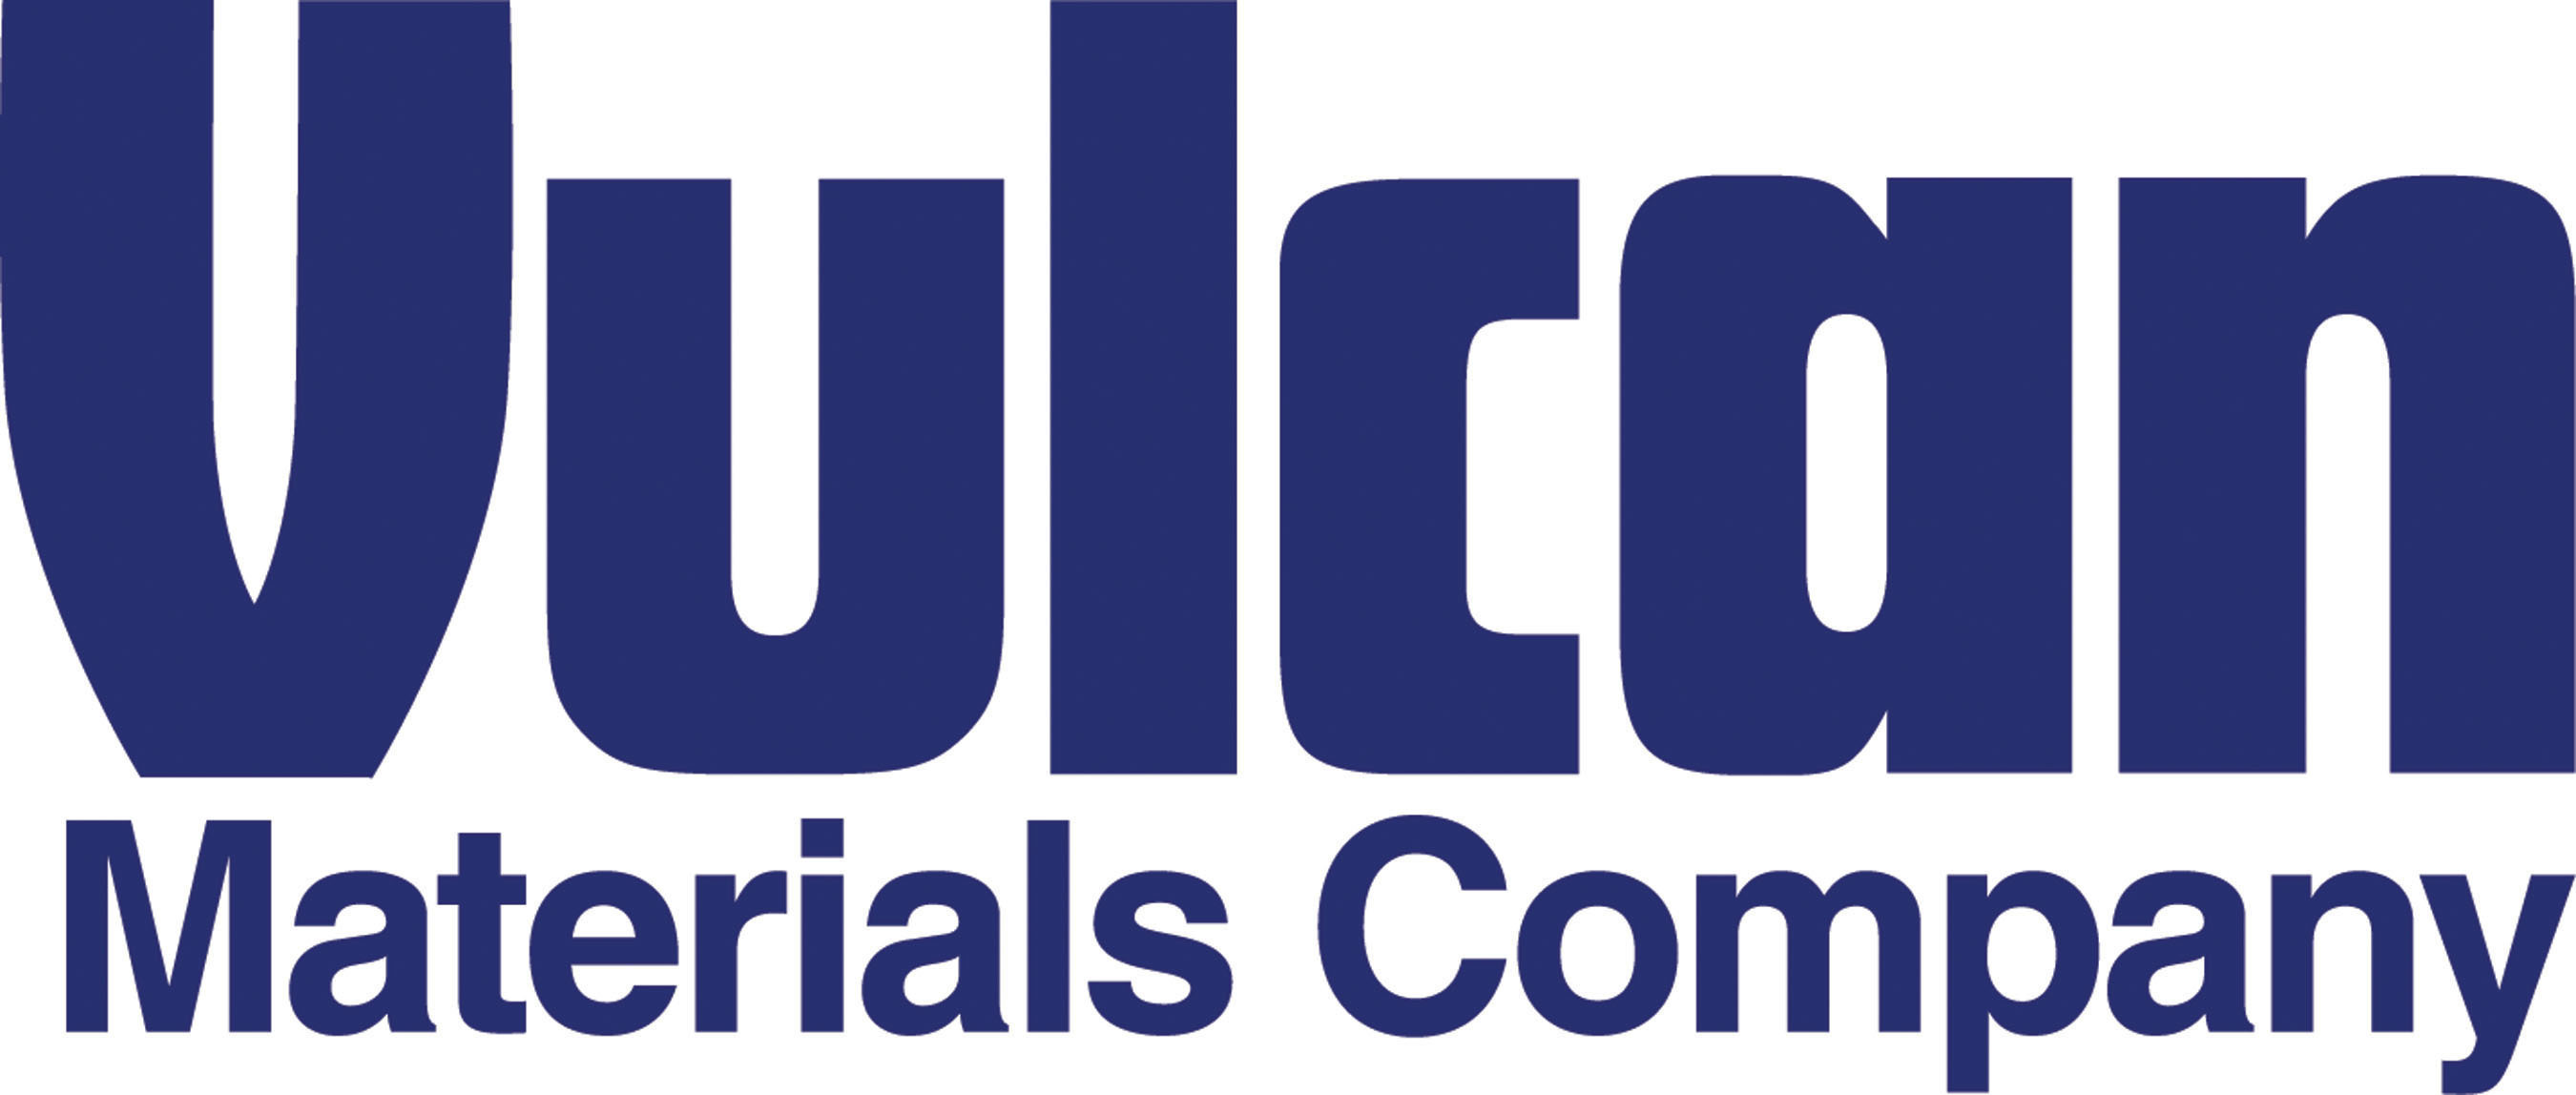 Vulcan has been in dispute with the Mexican government since 2018 over its aggregates operations in the country